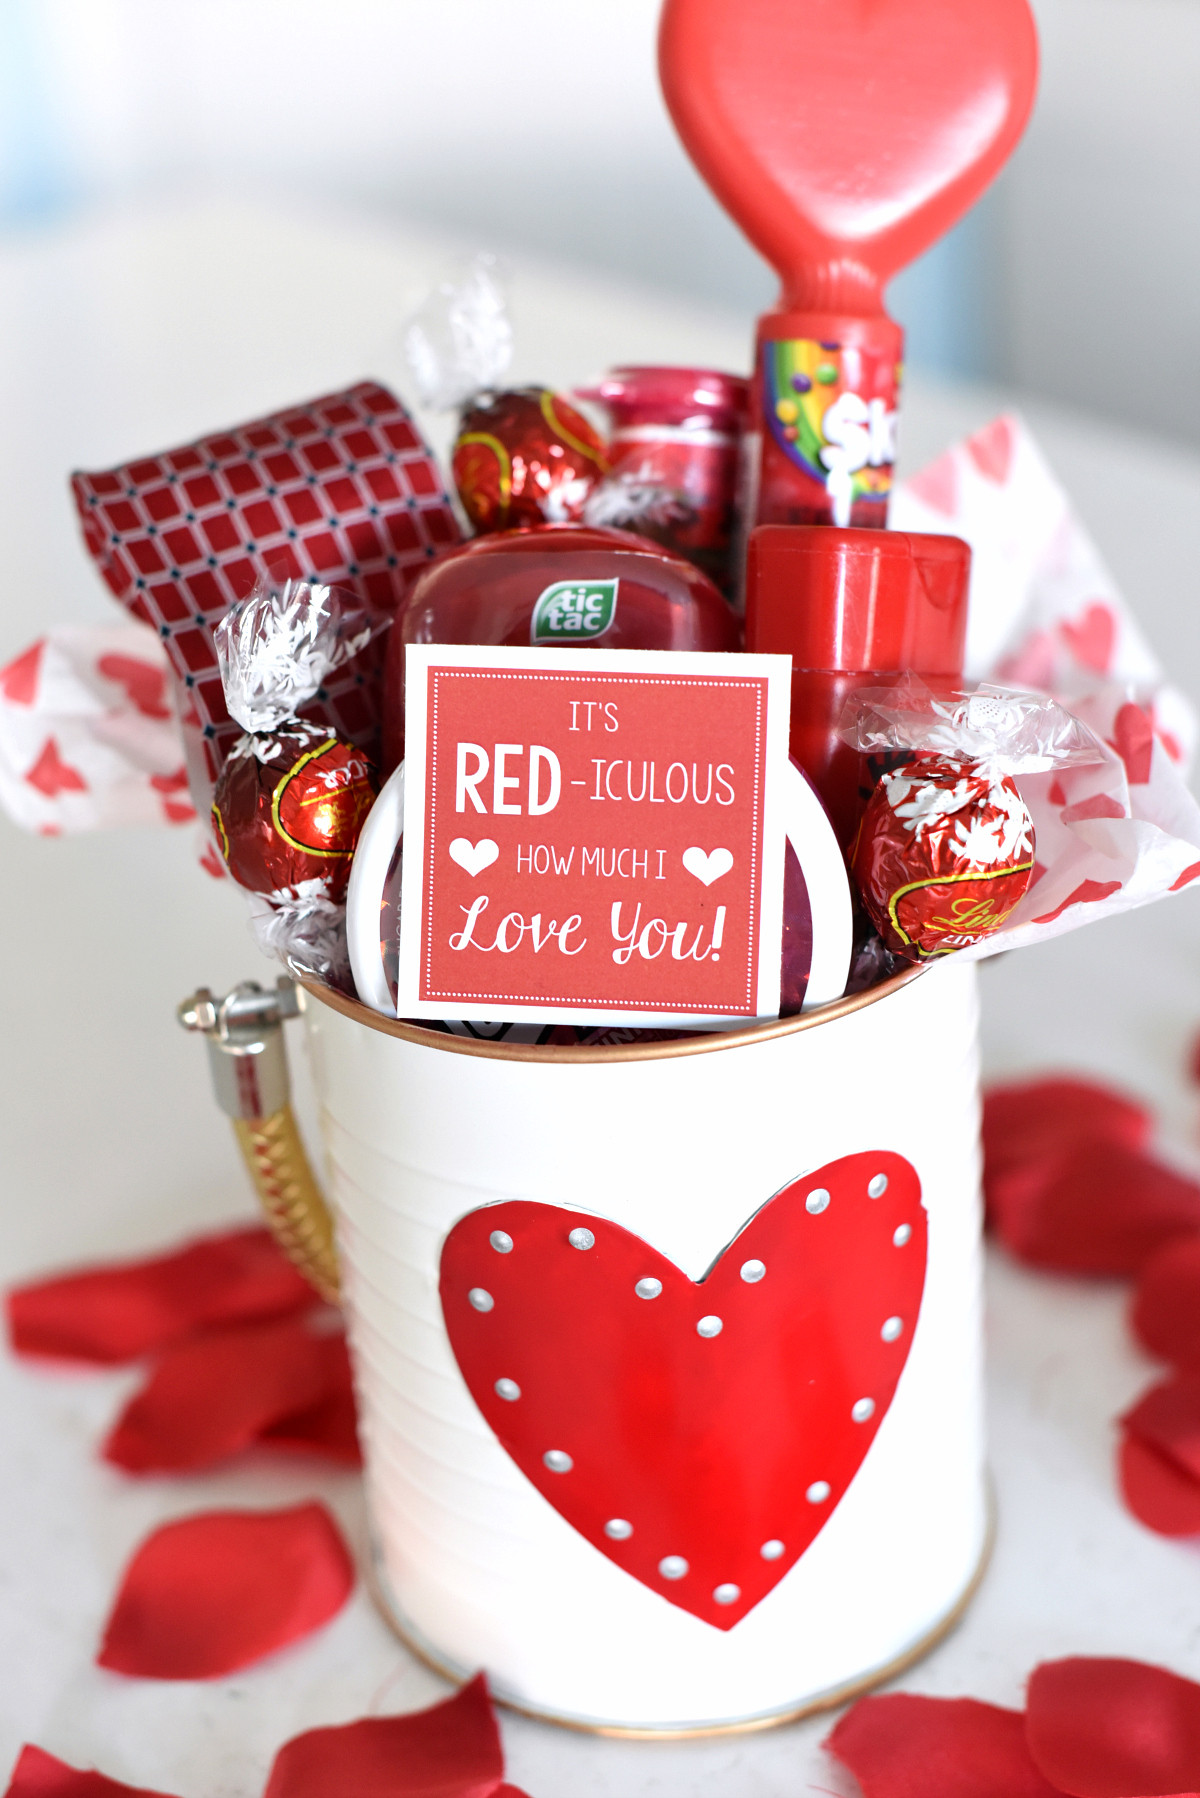 Guy Gift Ideas For Valentines Day
 25 DIY Valentine s Day Gift Ideas Teens Will Love